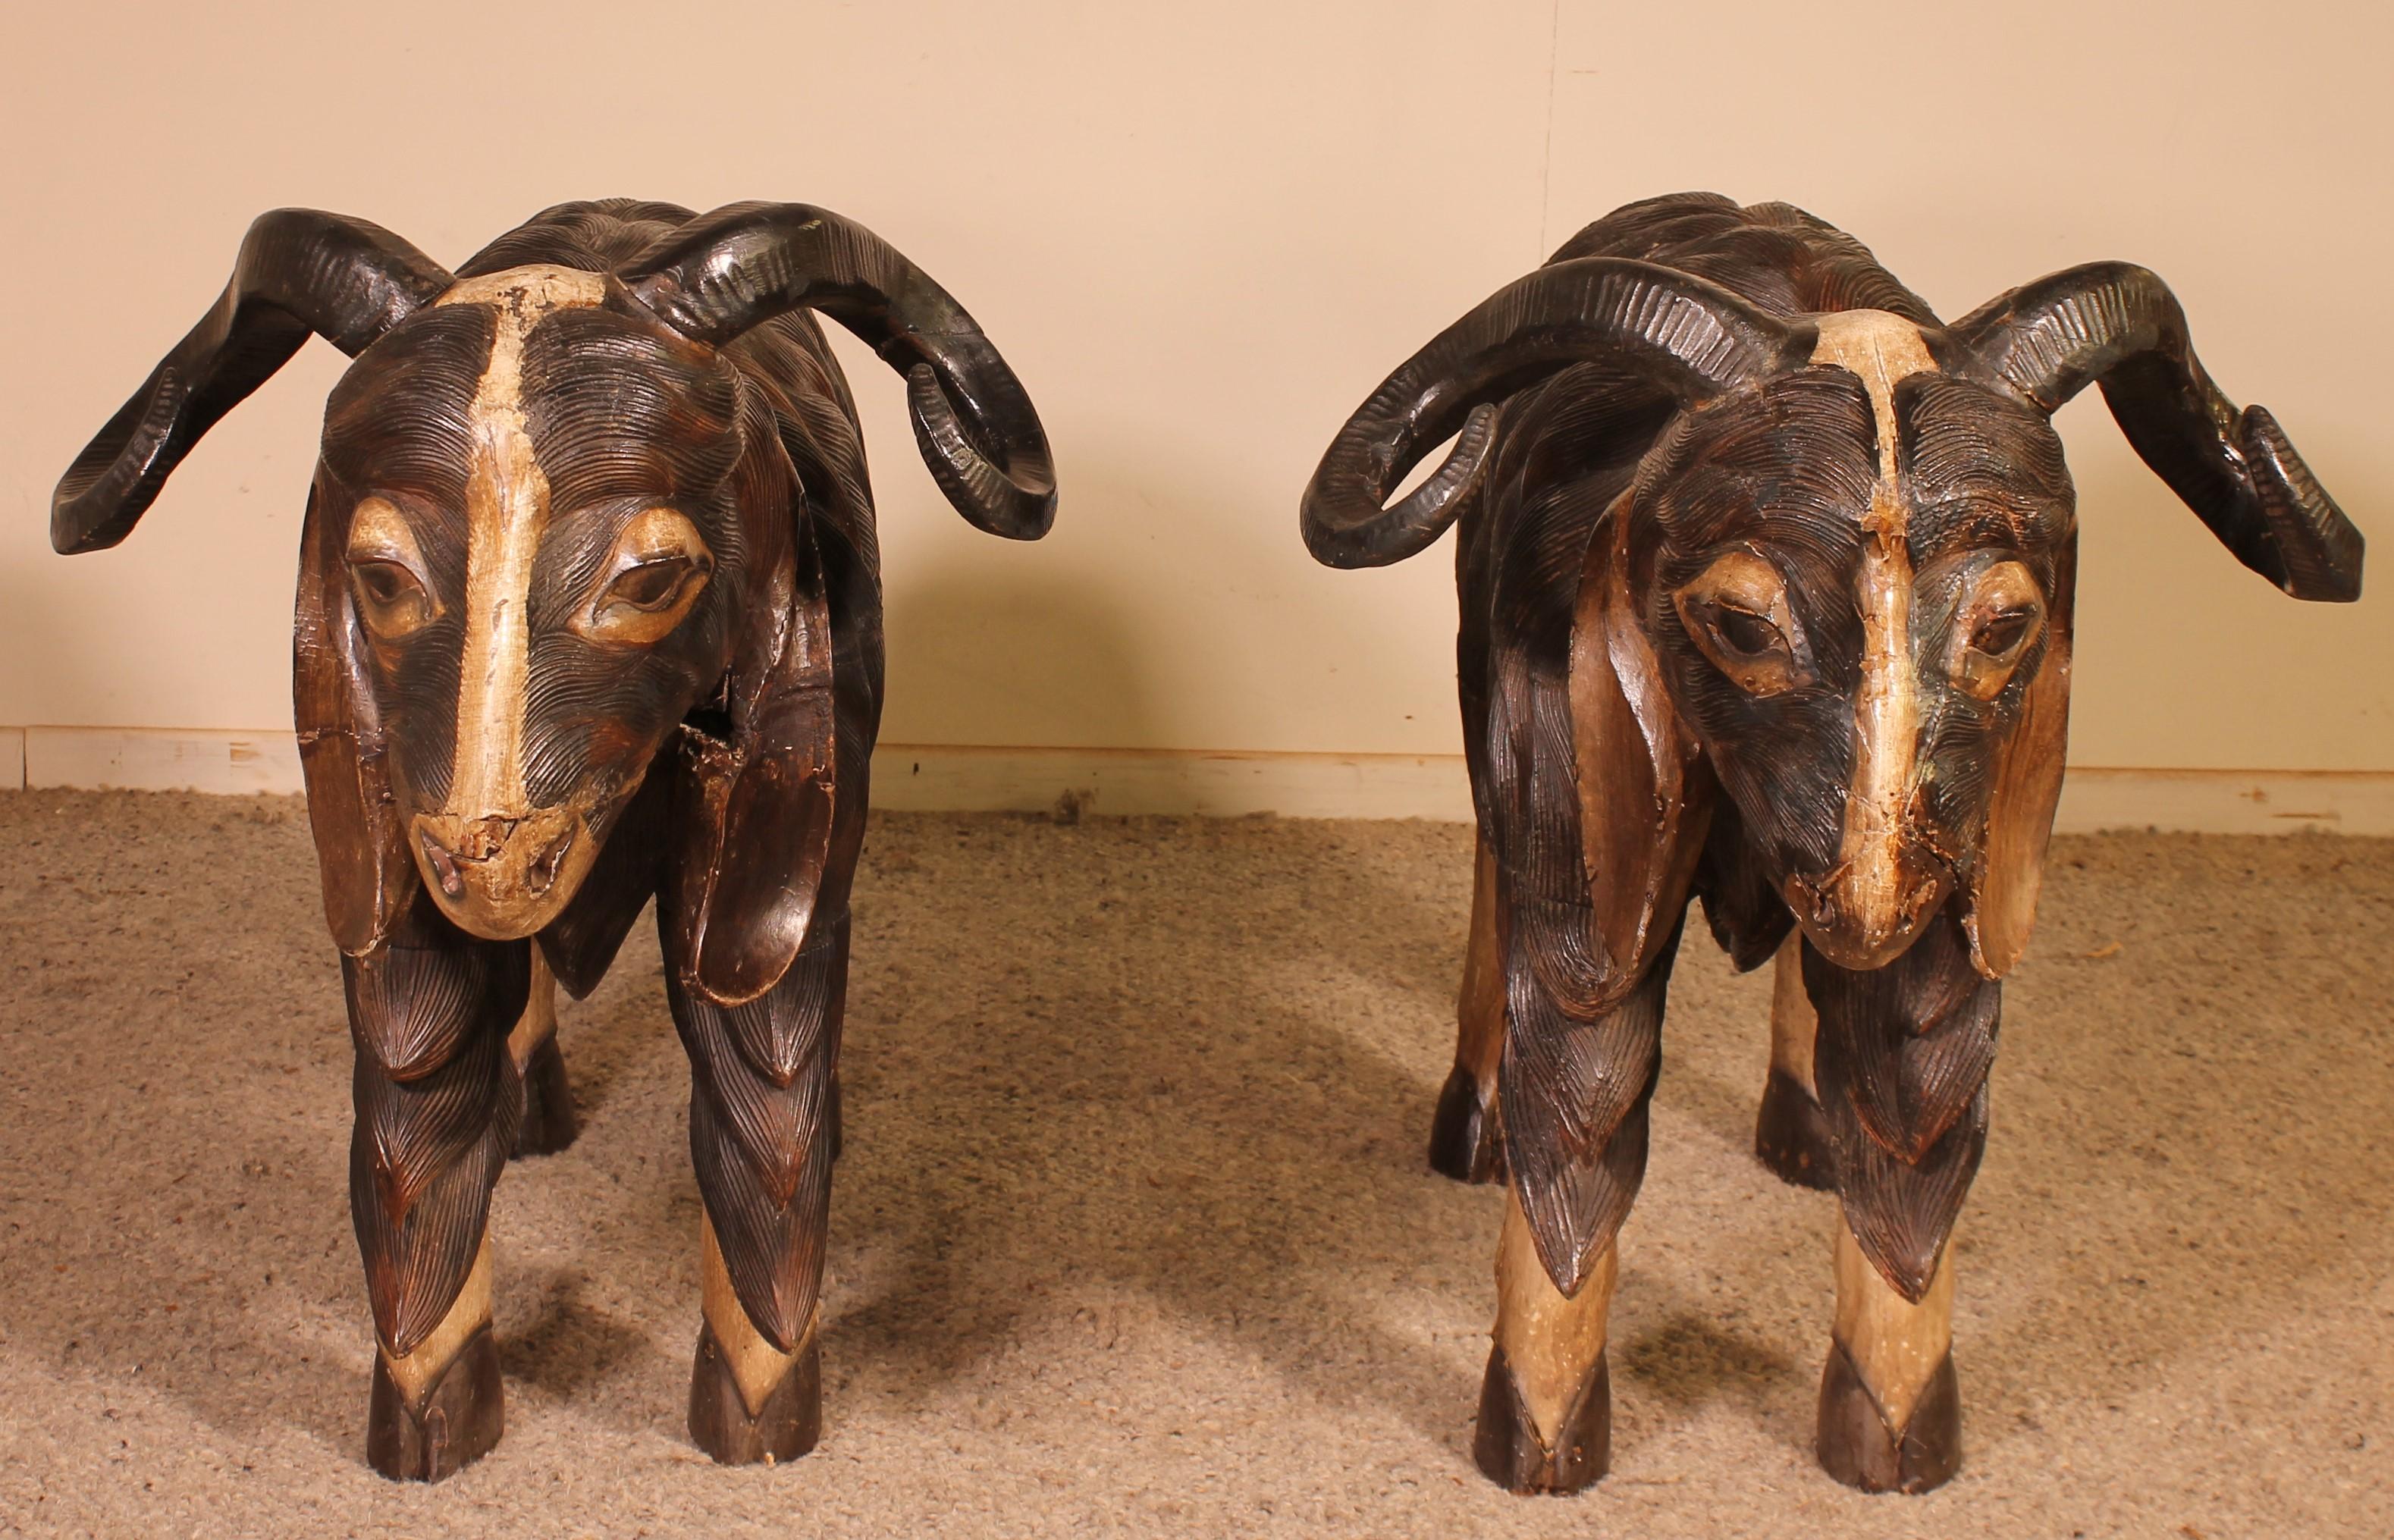 Superb pair of rams in polychrome carved wood from Scotland-19th century

Very elegant and unique pair of rams which are almost carved at life size which come from a Manor in Scotland.

Extraordinary work of very good quality

Beautiful